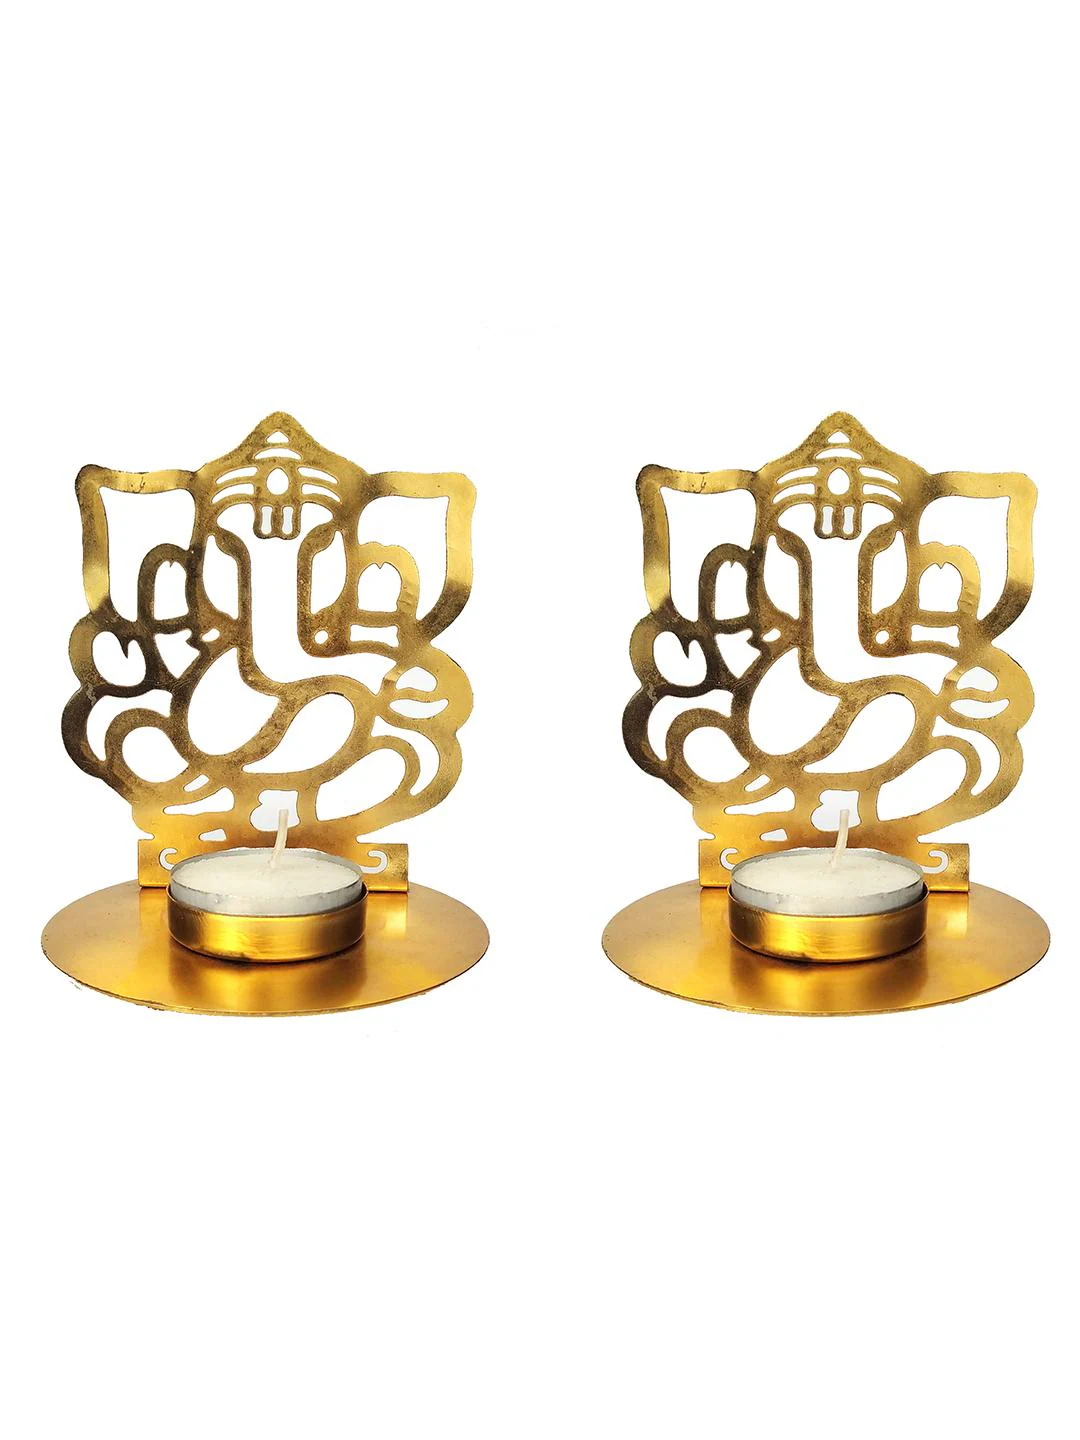 Deepawali Traditional Decorative Diya in Lord Ganesha Shape for Home/Office.Religious Tea Light Candle Holder Stand Diwali .Indian Gift Items. 4 Pc Set Lord Ganesha Shape Diwali Shadow Diya